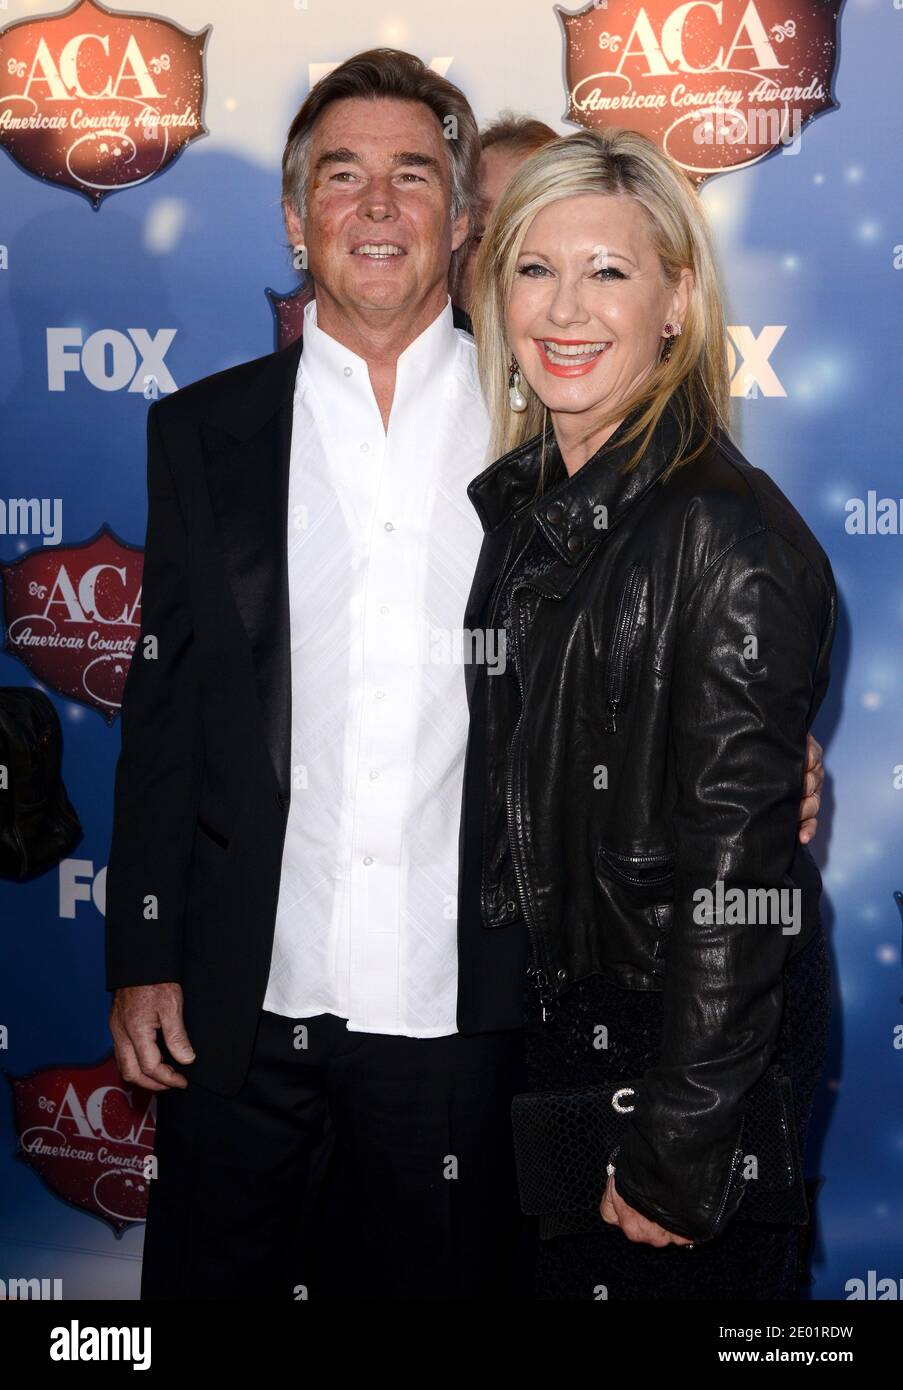 John Easterling and Olivia Newton-John arrive at the 2013 American Country Awards at the Mandalay Bay Events Center in Las Vegas, NV, USA, on December 10, 2013. Photo by Lionel Hahn/ABACAPRESS.COM Stock Photo